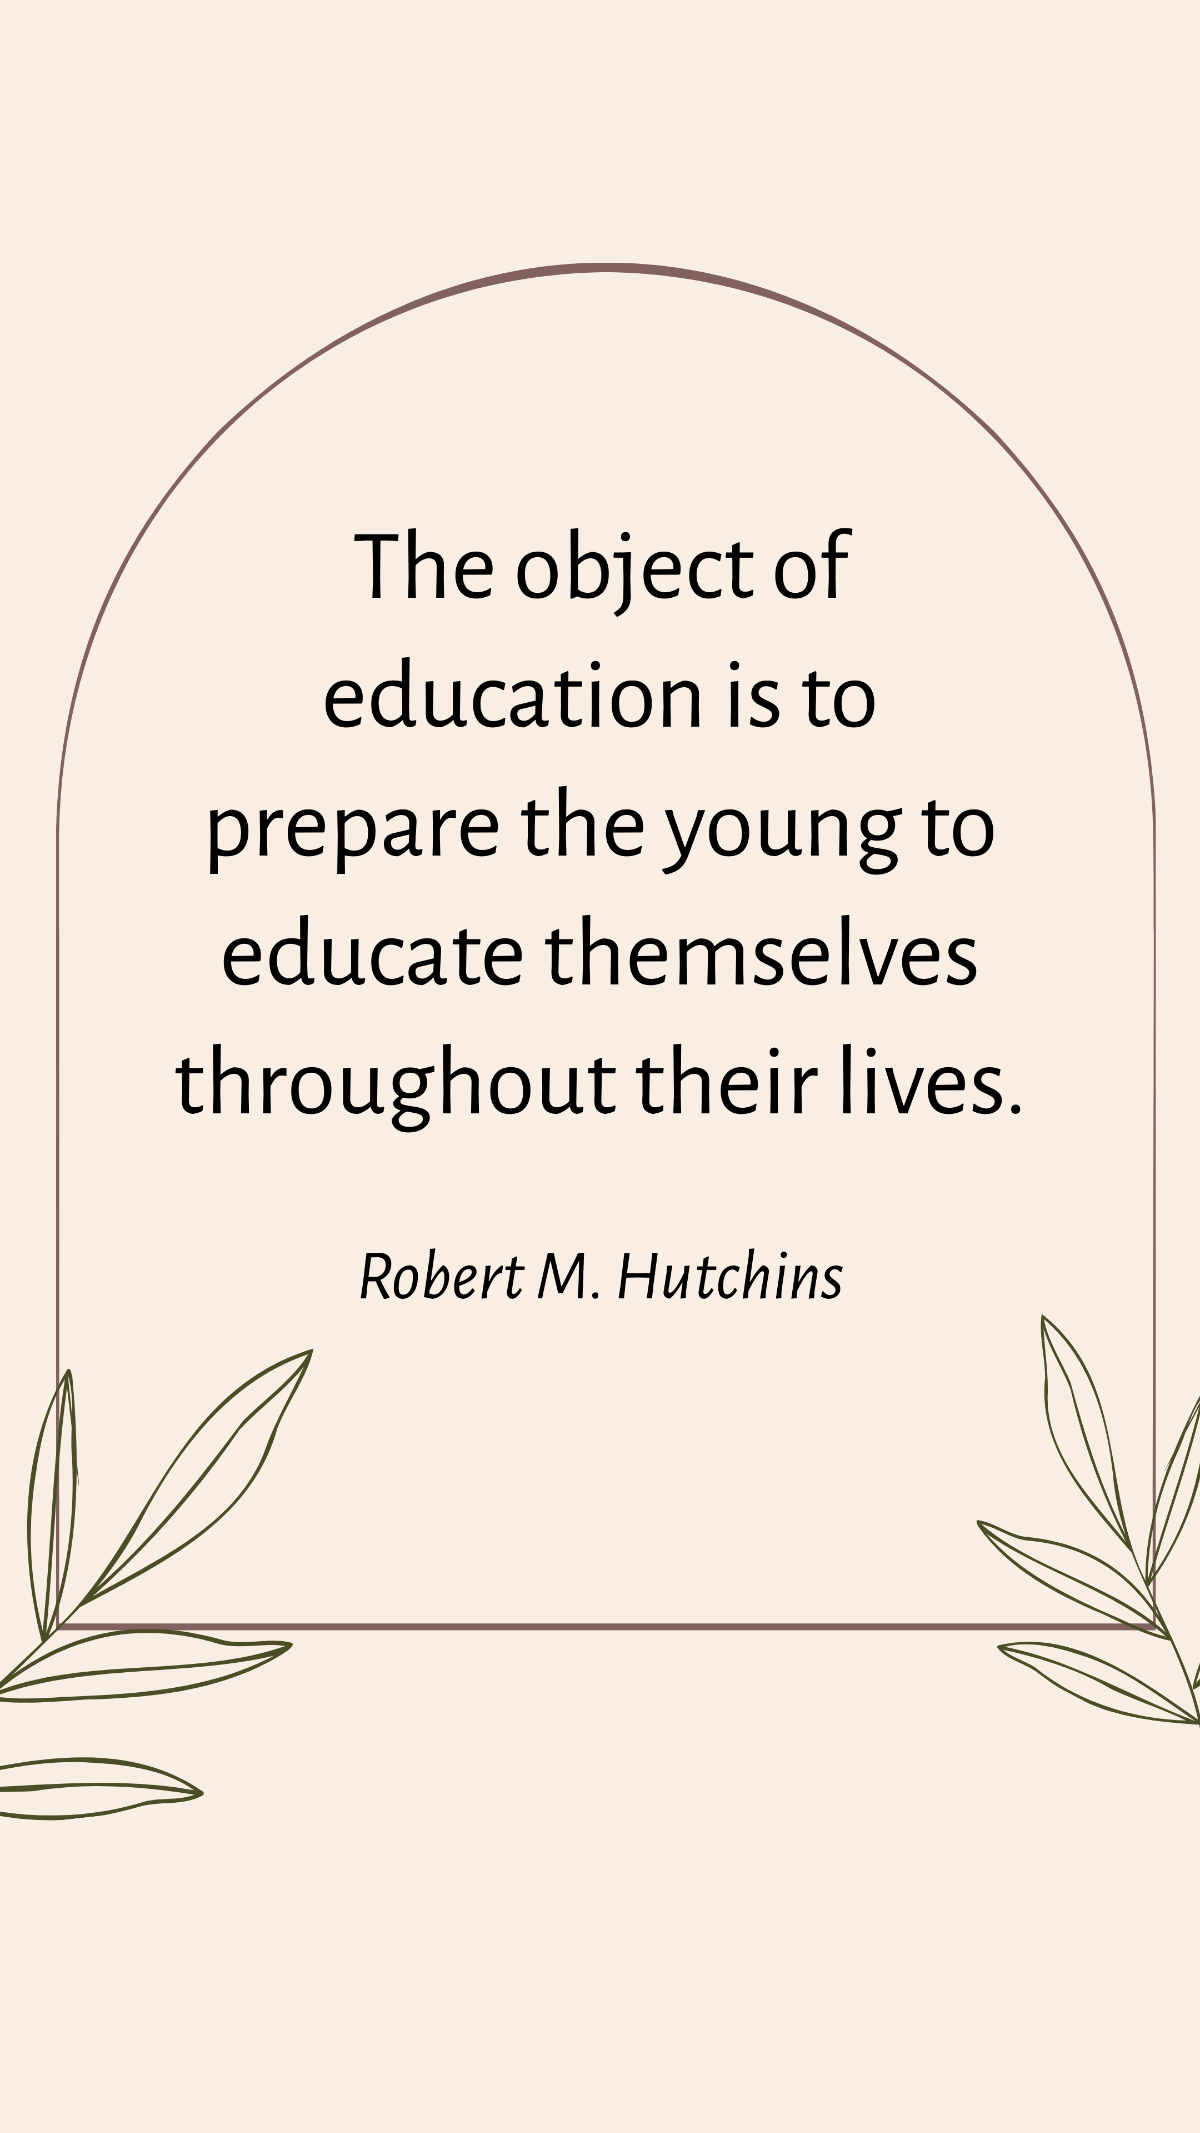 Robert M. Hutchins - The object of education is to prepare the young to educate themselves throughout their lives.